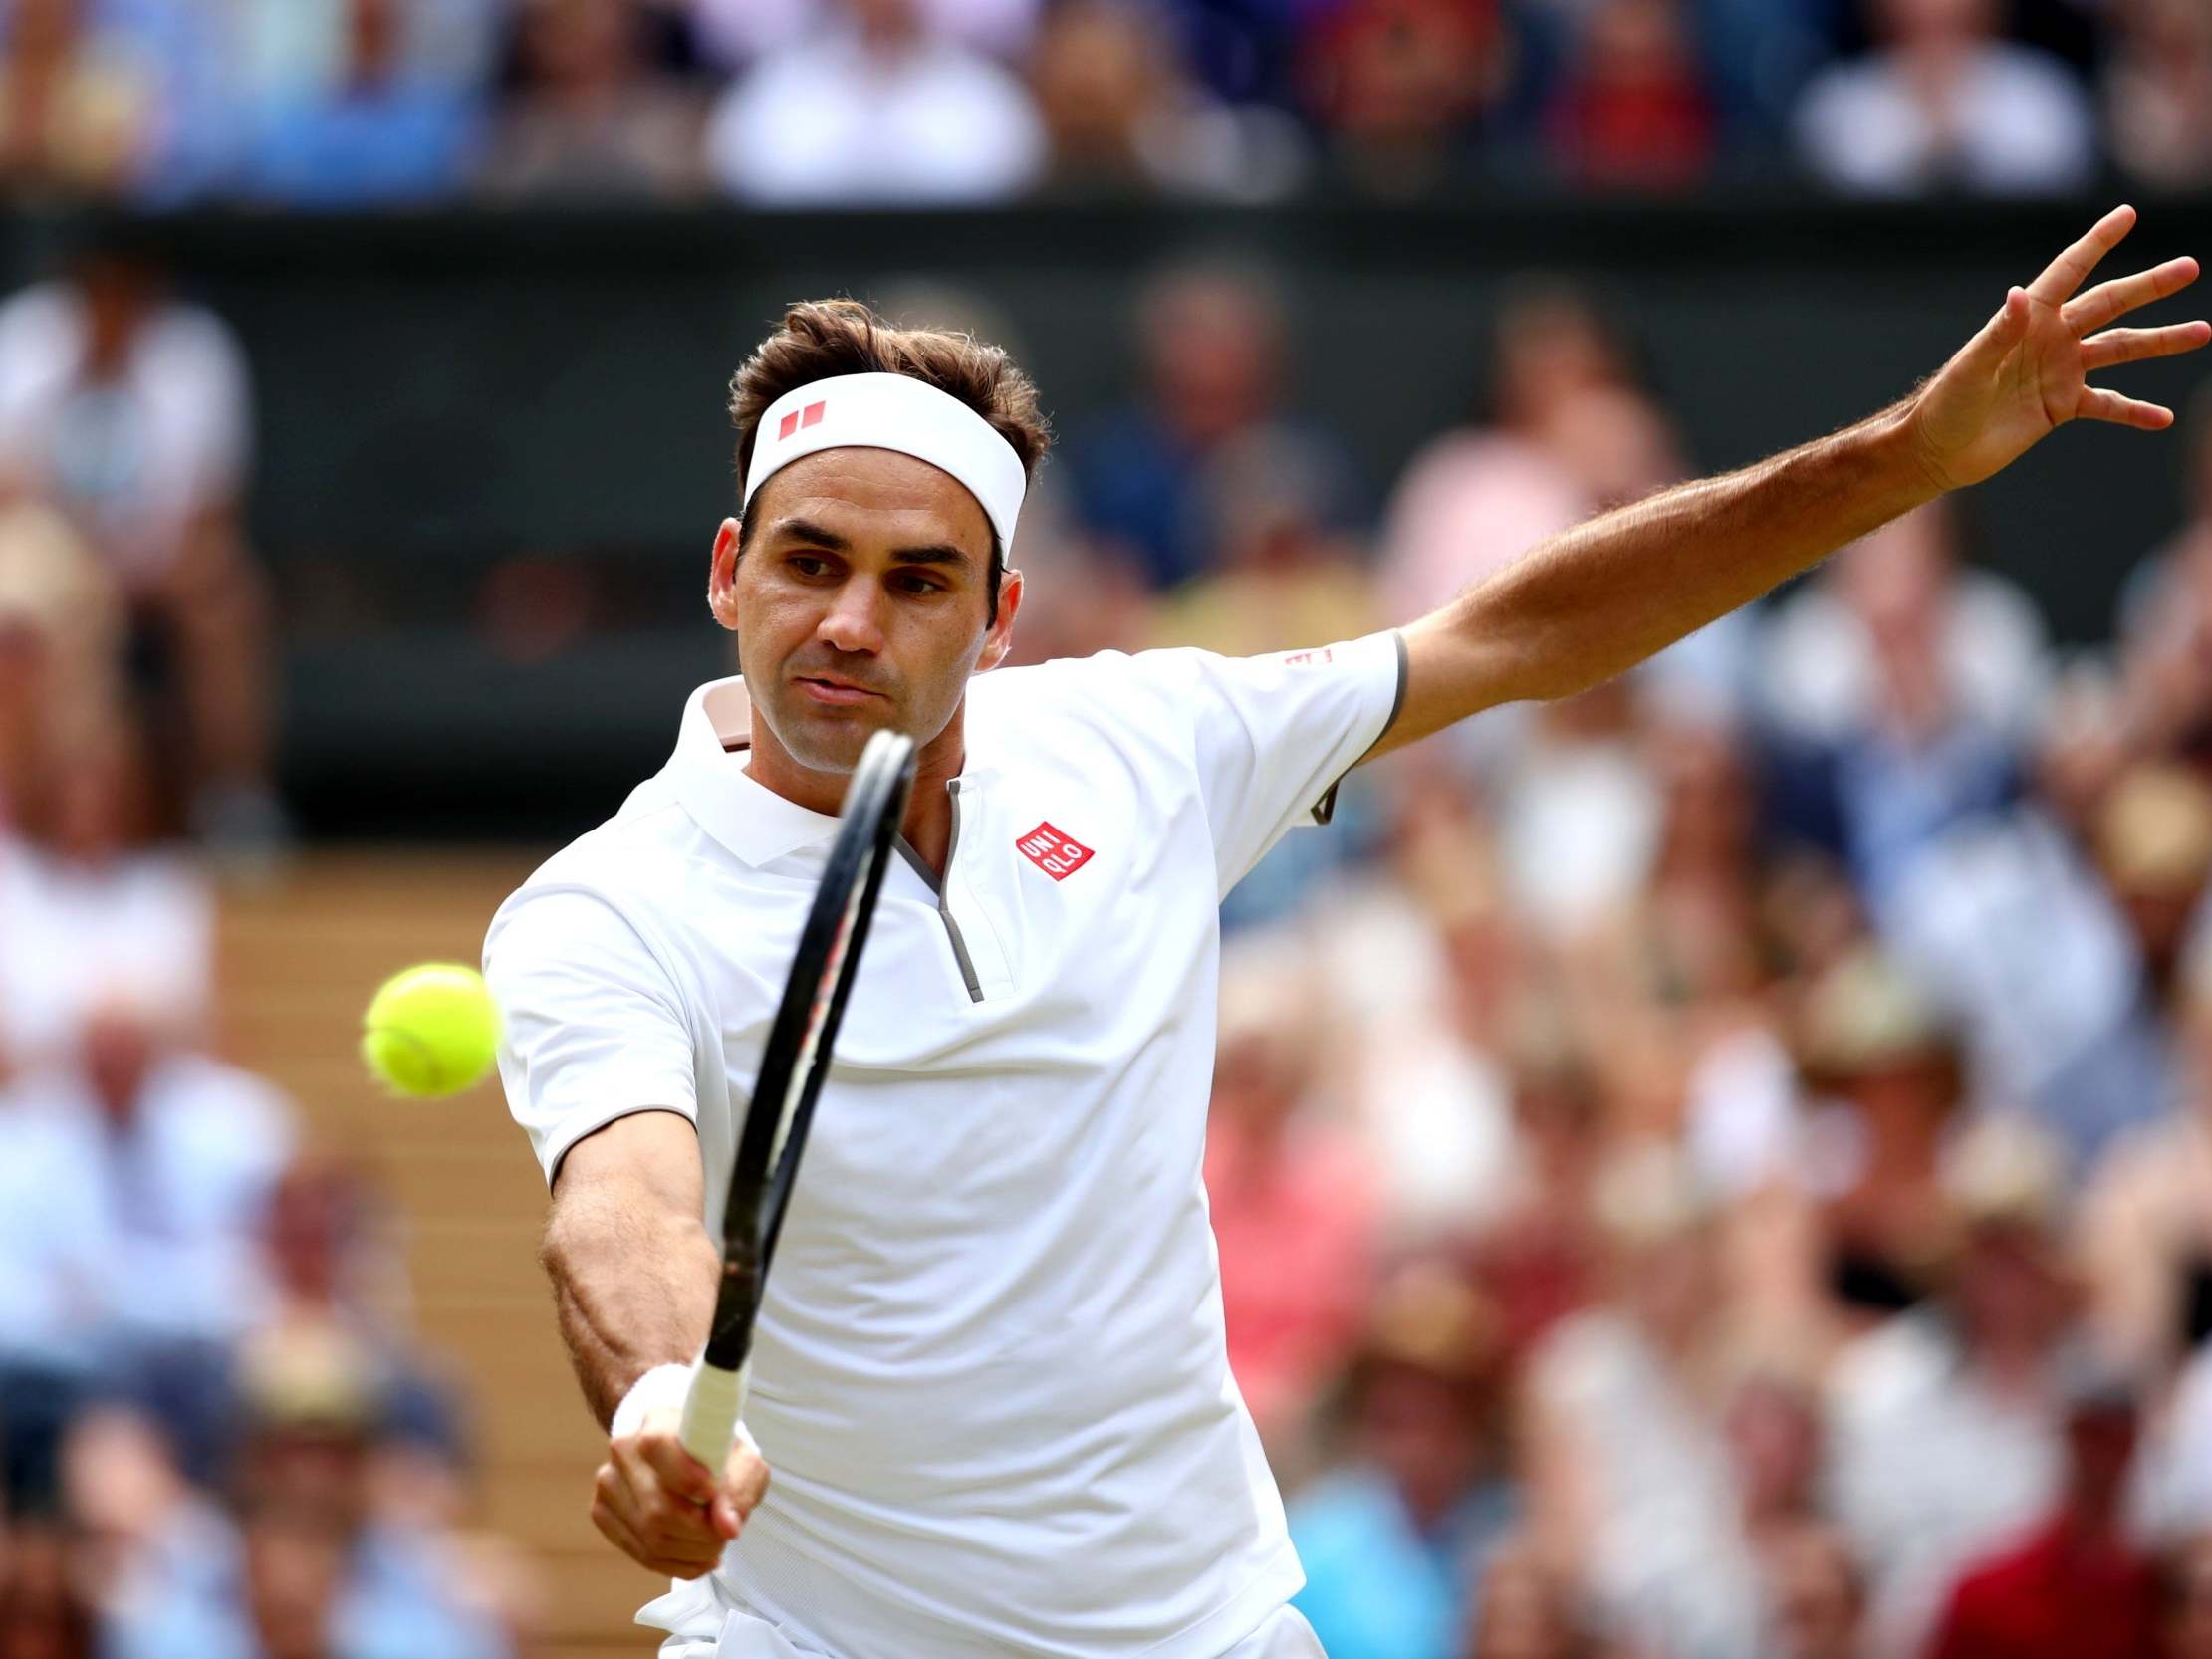 Federer rallies to send the final to a fifth set